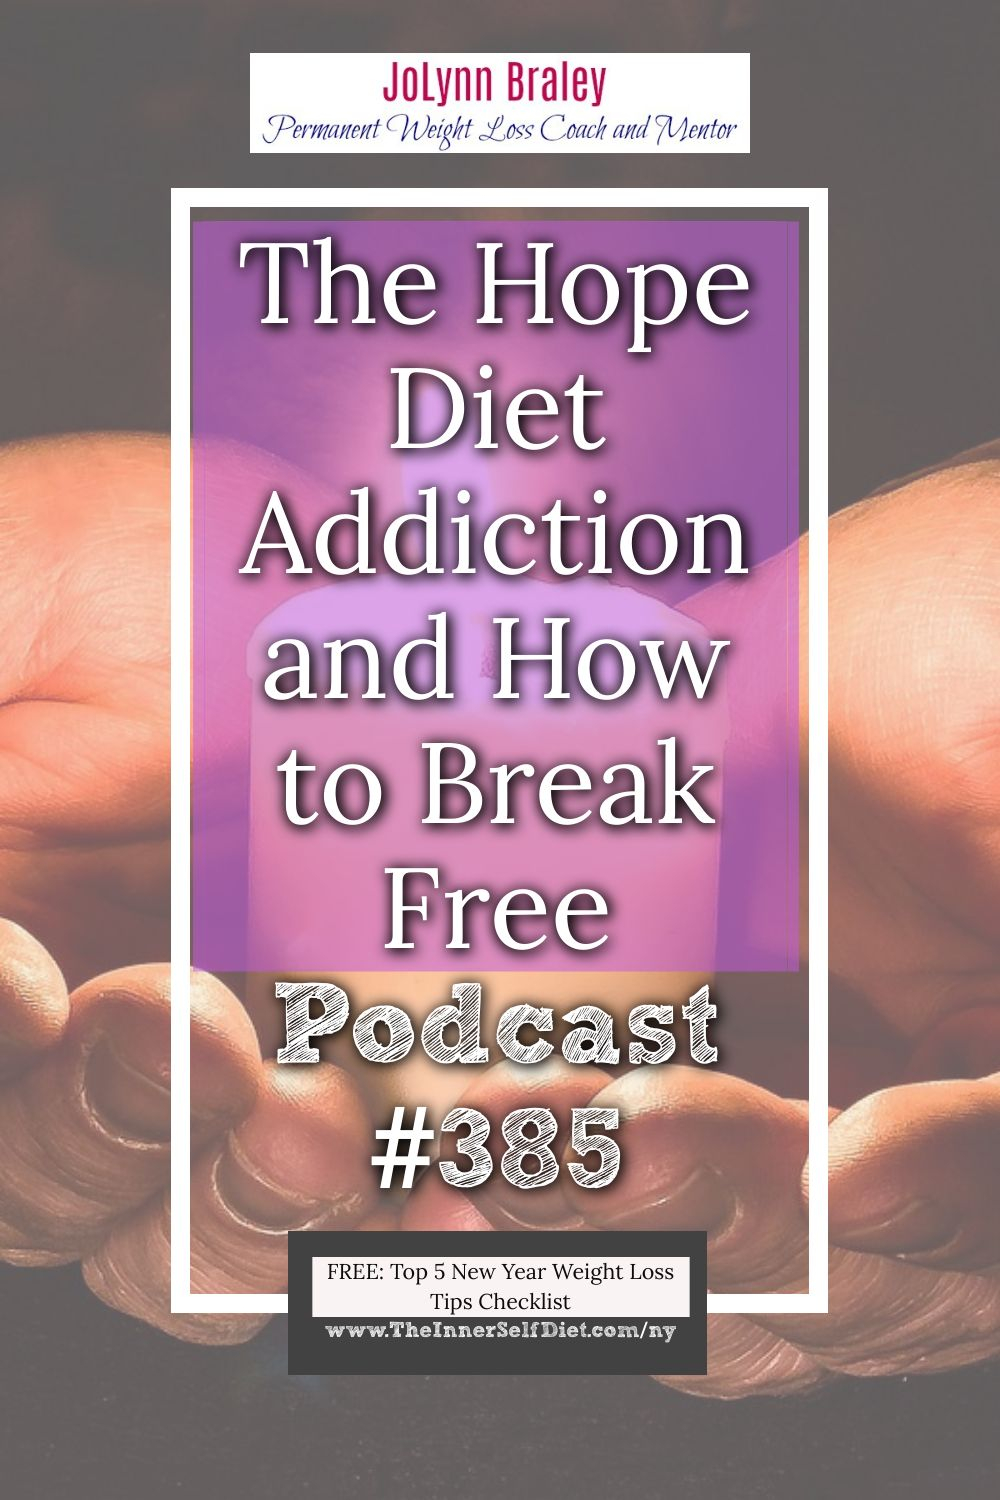 The Hope Diet Addiction: How to Break Free [Podcast #385]